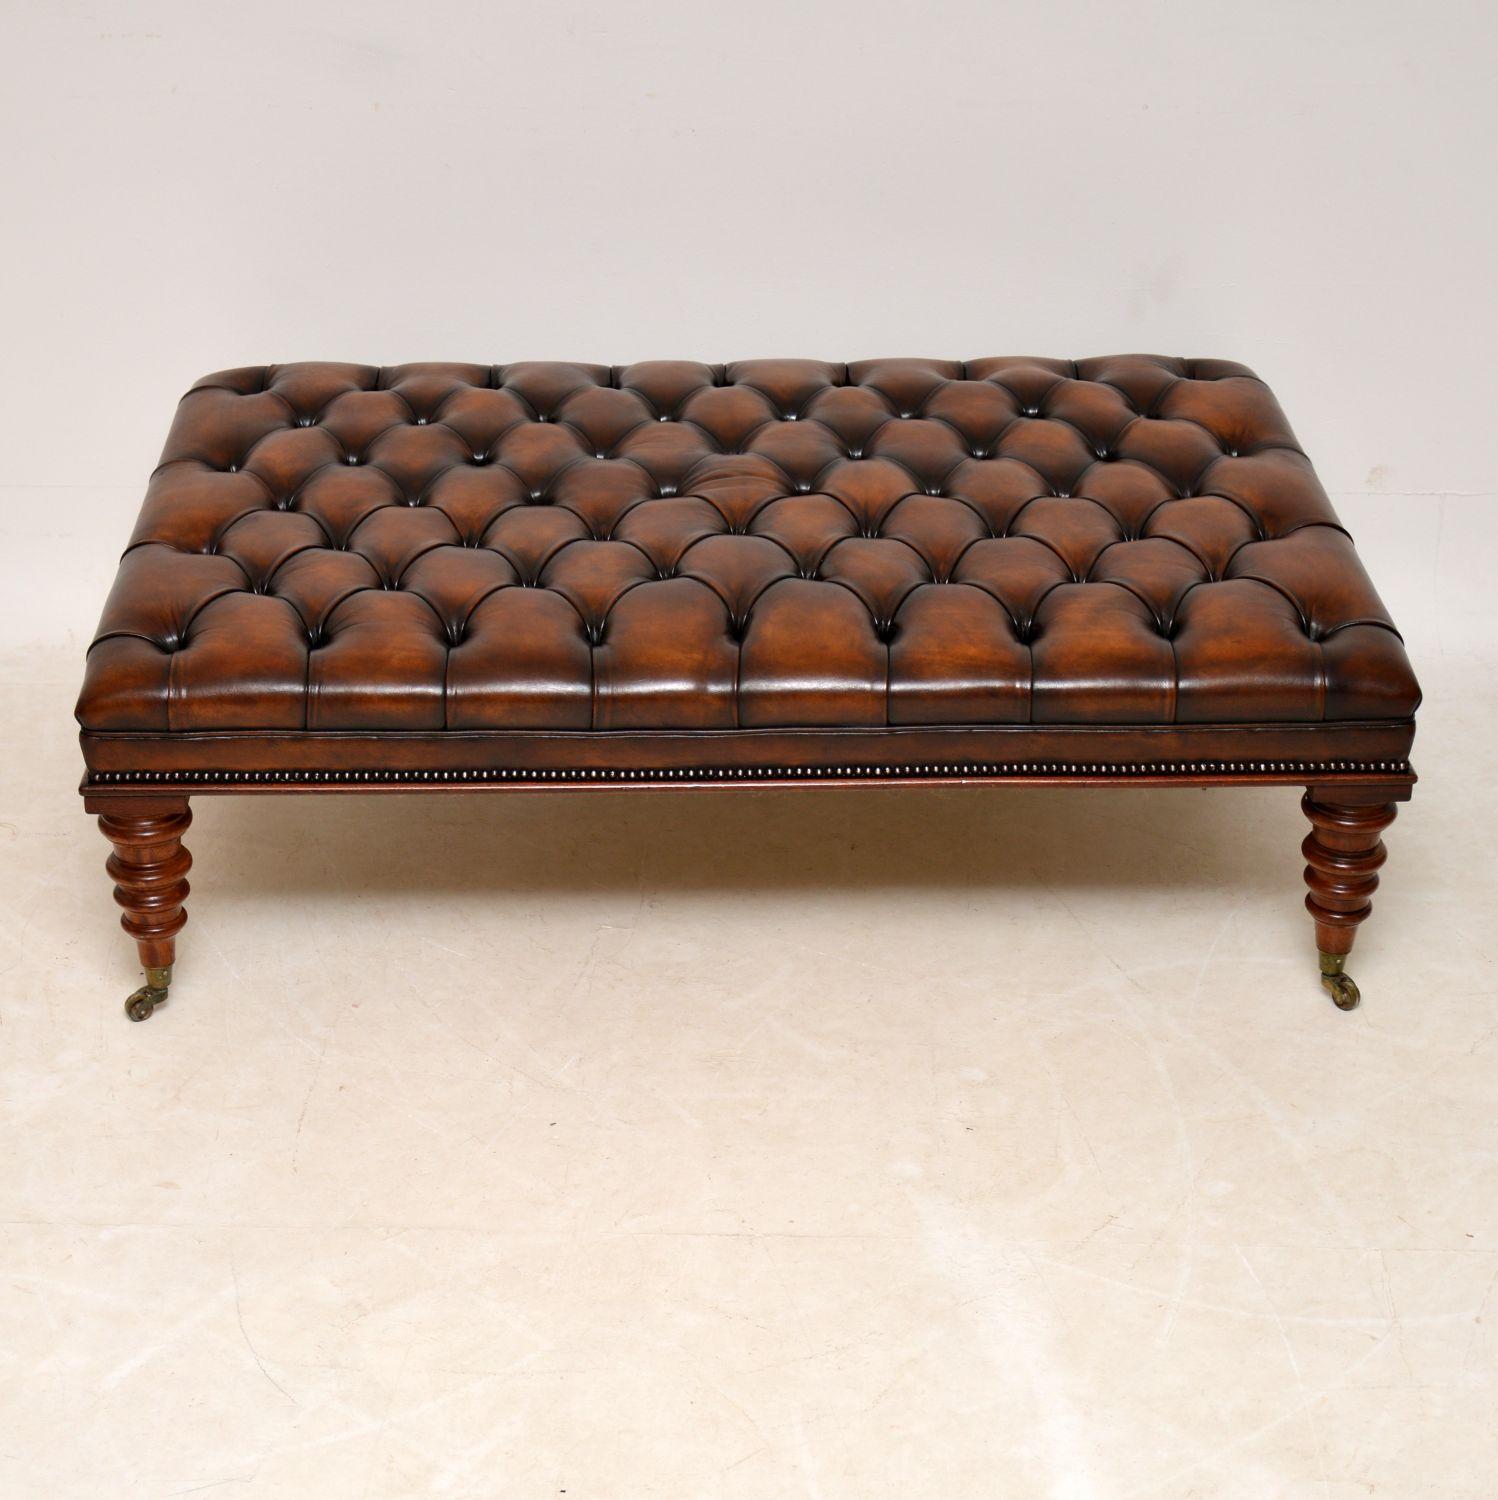 British Large Antique Victorian Style Deep Buttoned Leather Stool / Coffee Table